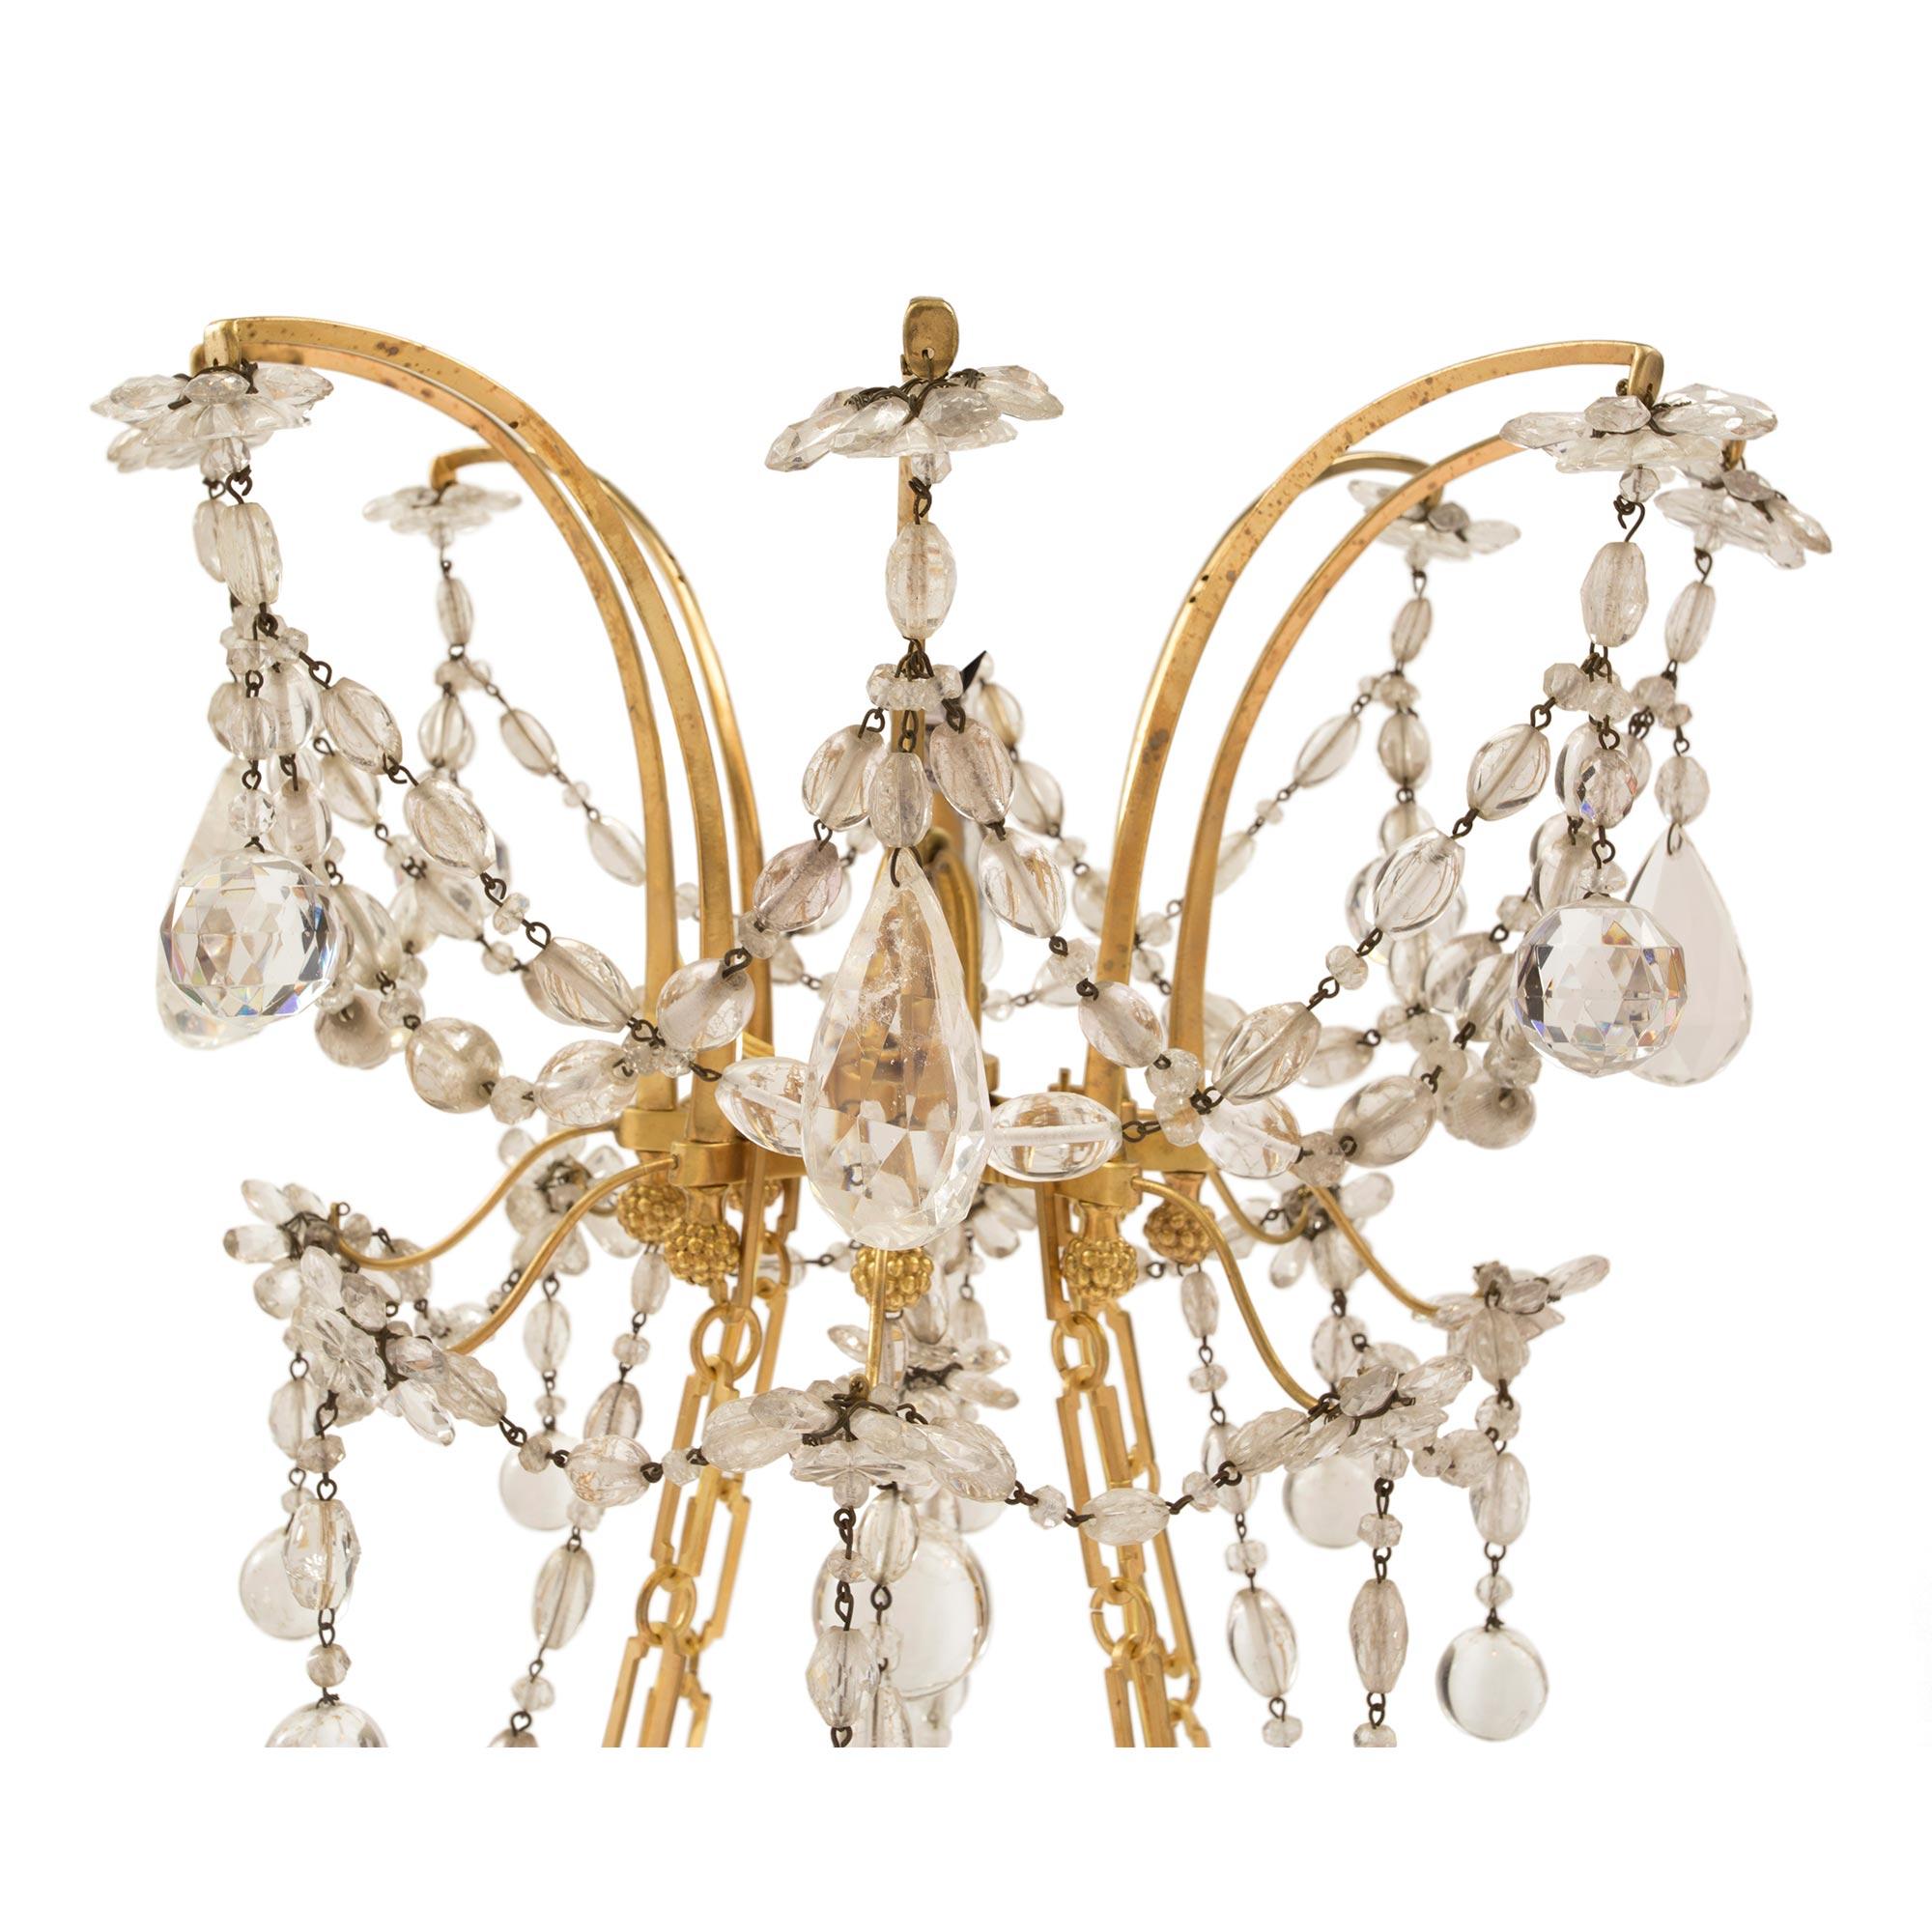 French 19th Century Louis XVI Style Ormolu, Baccarat and Rock Crystal Chandelier In Good Condition For Sale In West Palm Beach, FL